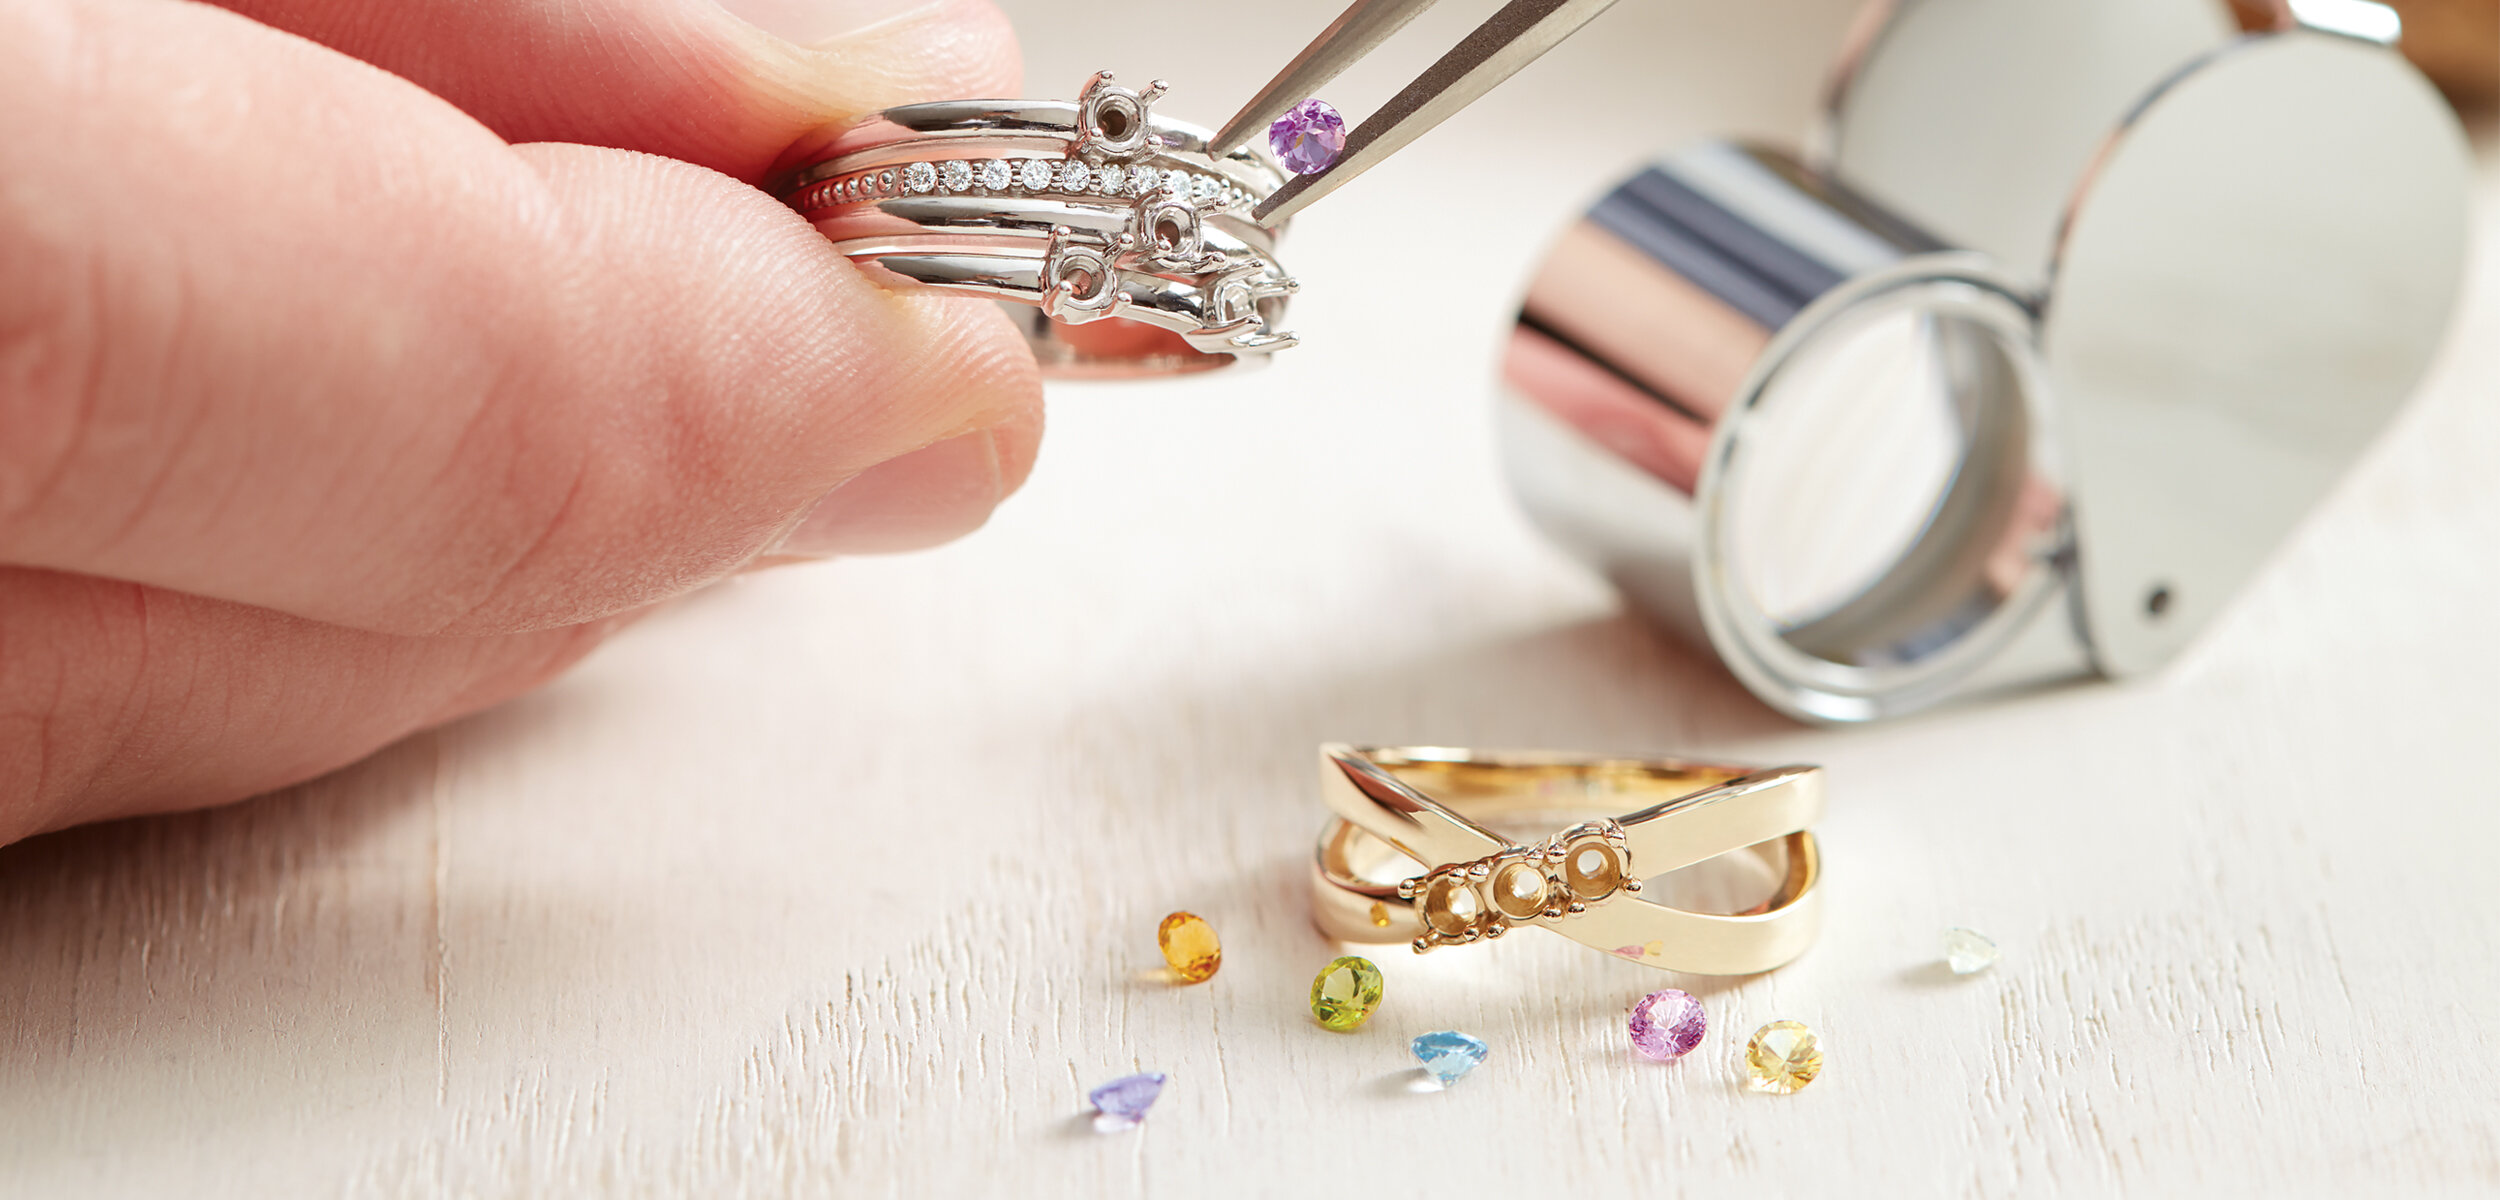 How to select personalized jewellery pieces and rings